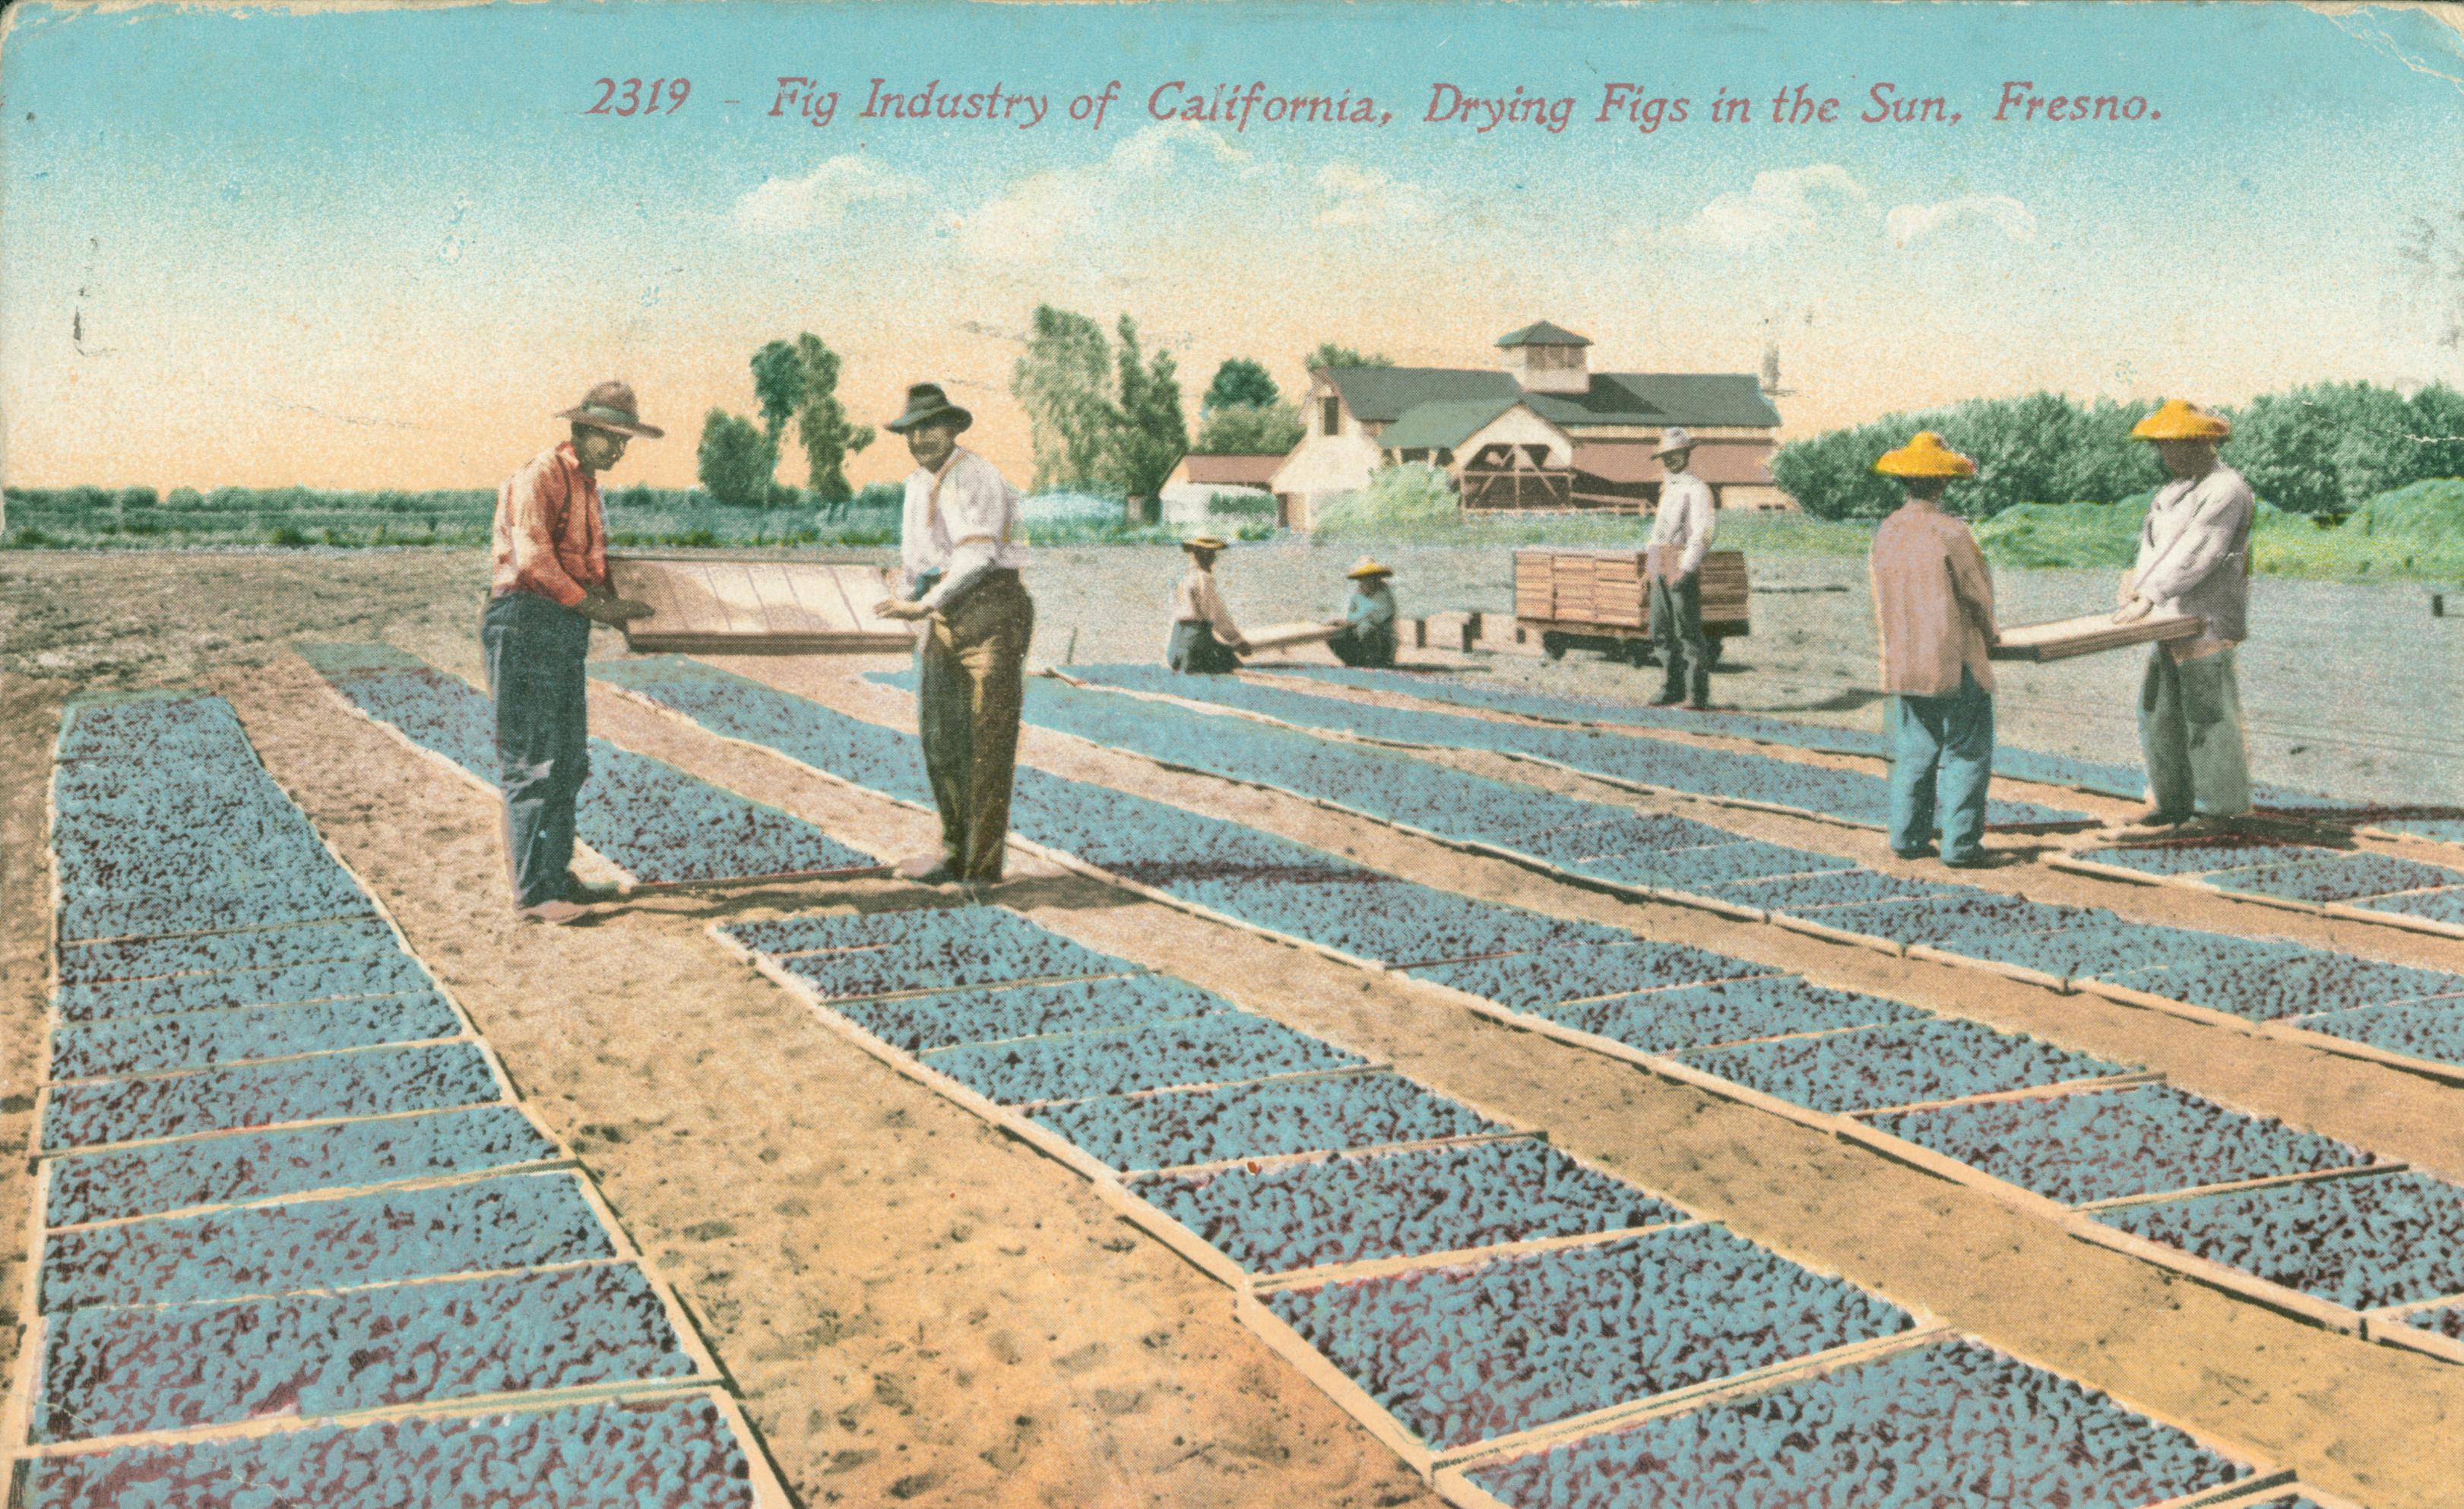 Shows several workers, including some in traditional Chinese hats, laying out figs to dry in a field